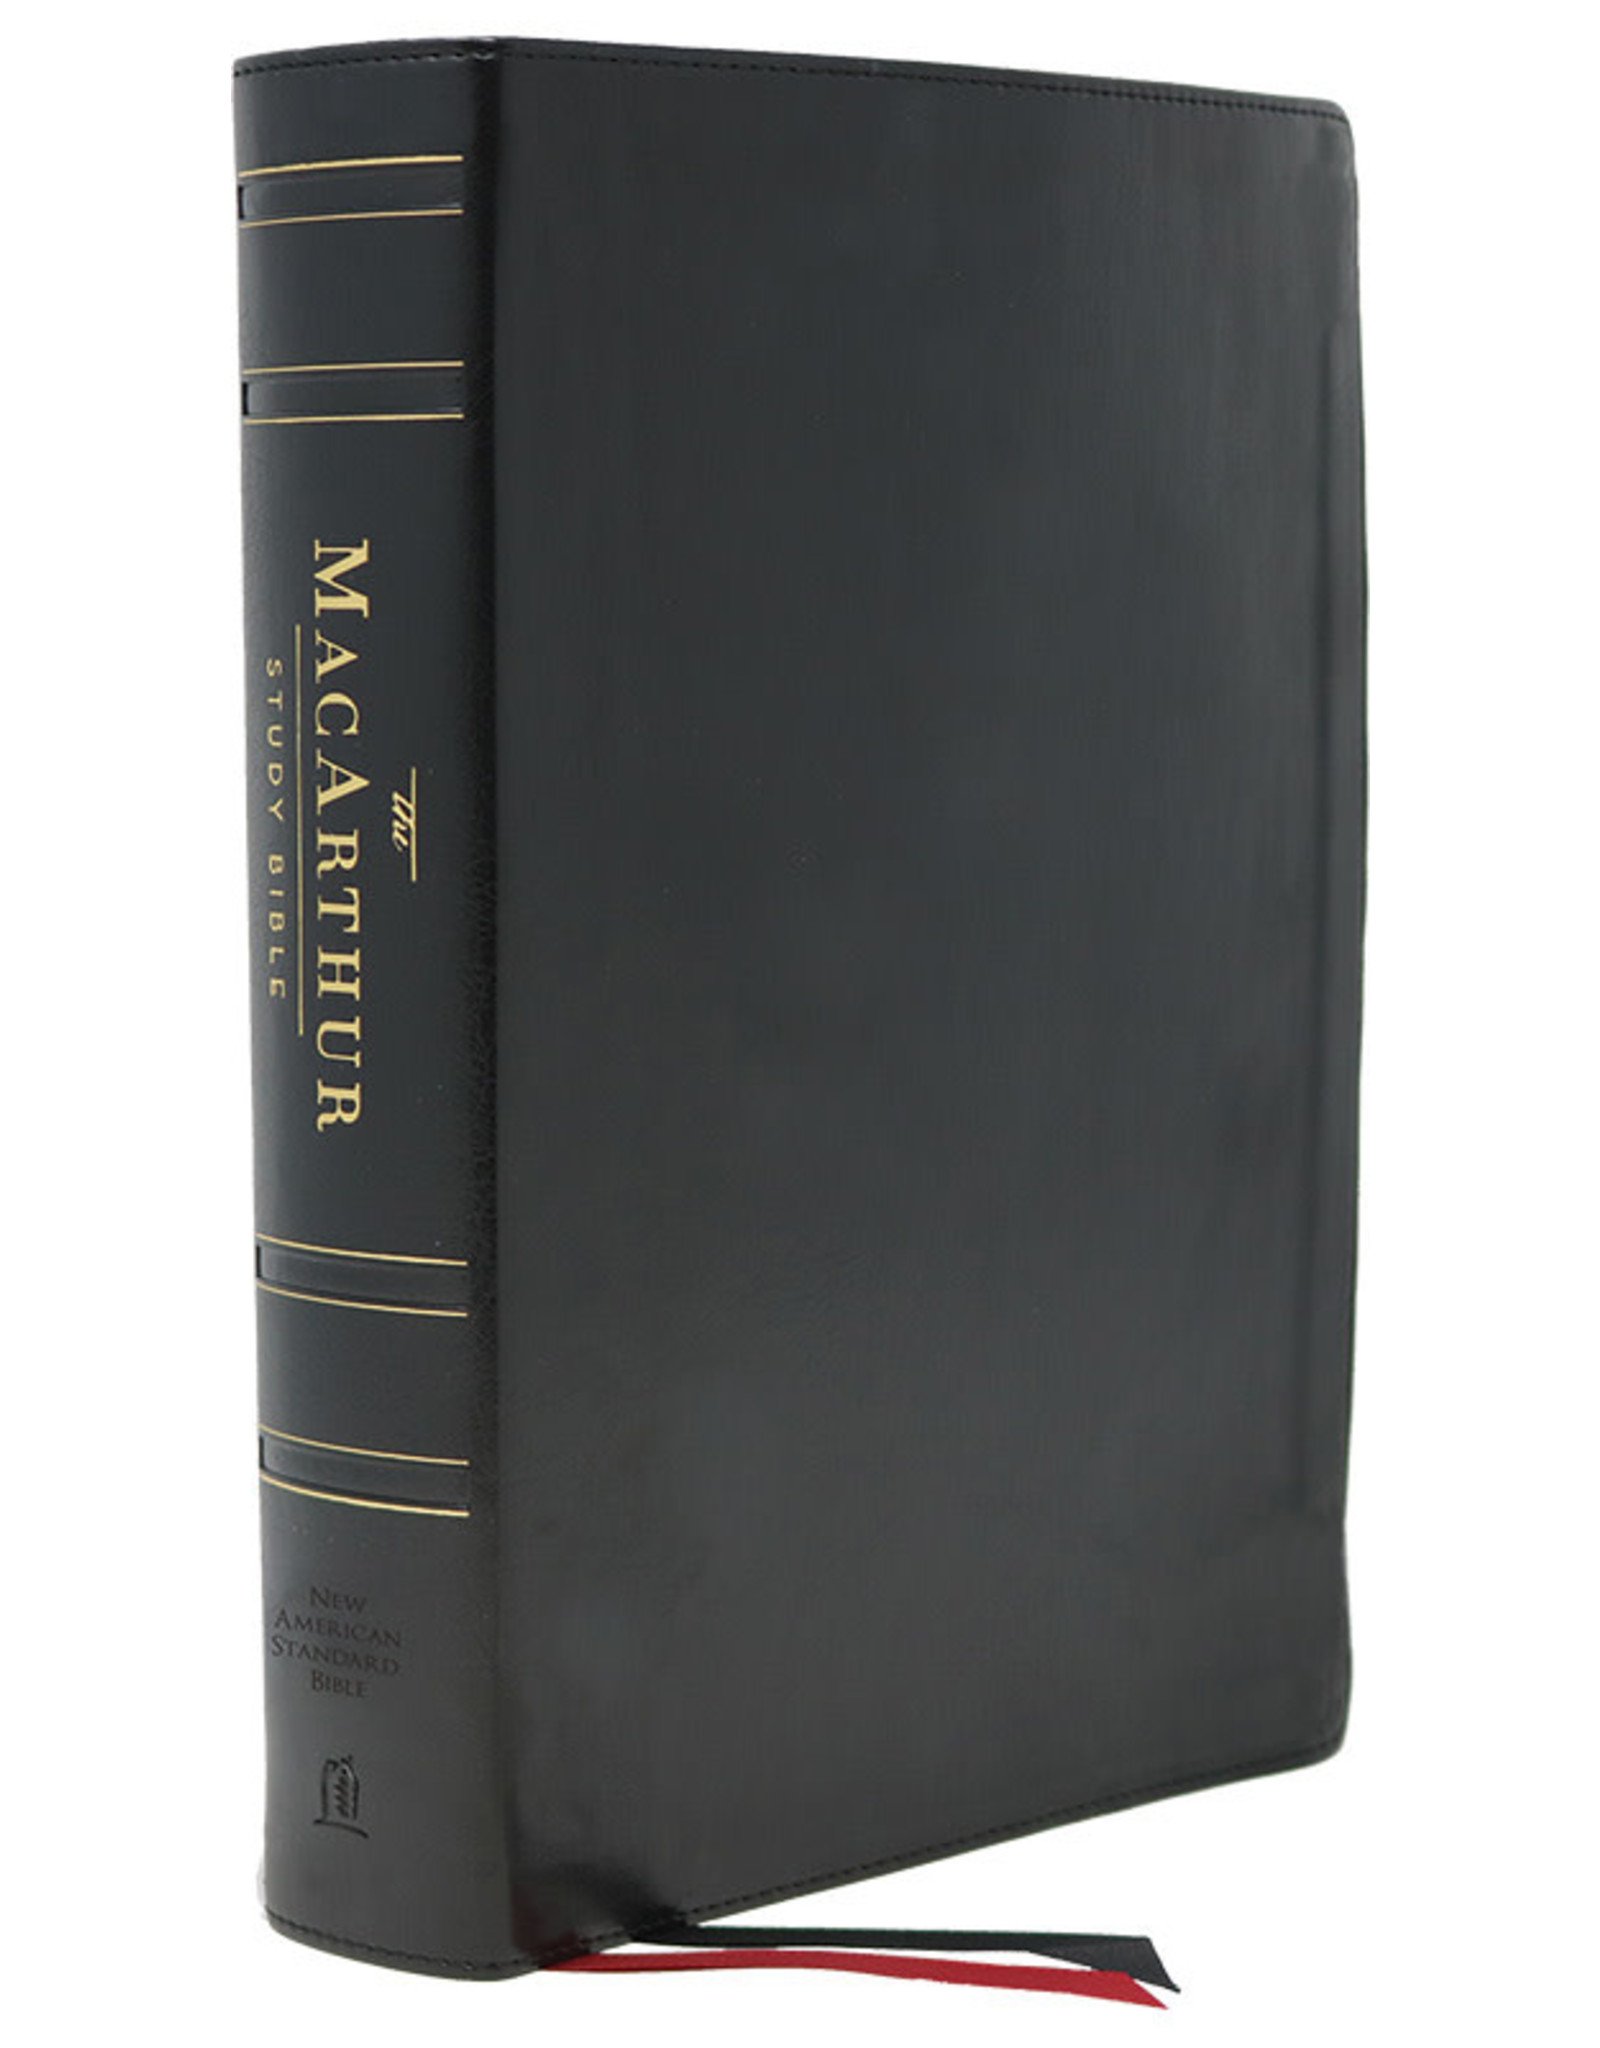 Harper Collins / Thomas Nelson / Zondervan NASB MSB MacArthur Study Bible (2nd Edition, Genuine Leather, Black, Thumb Indexed)